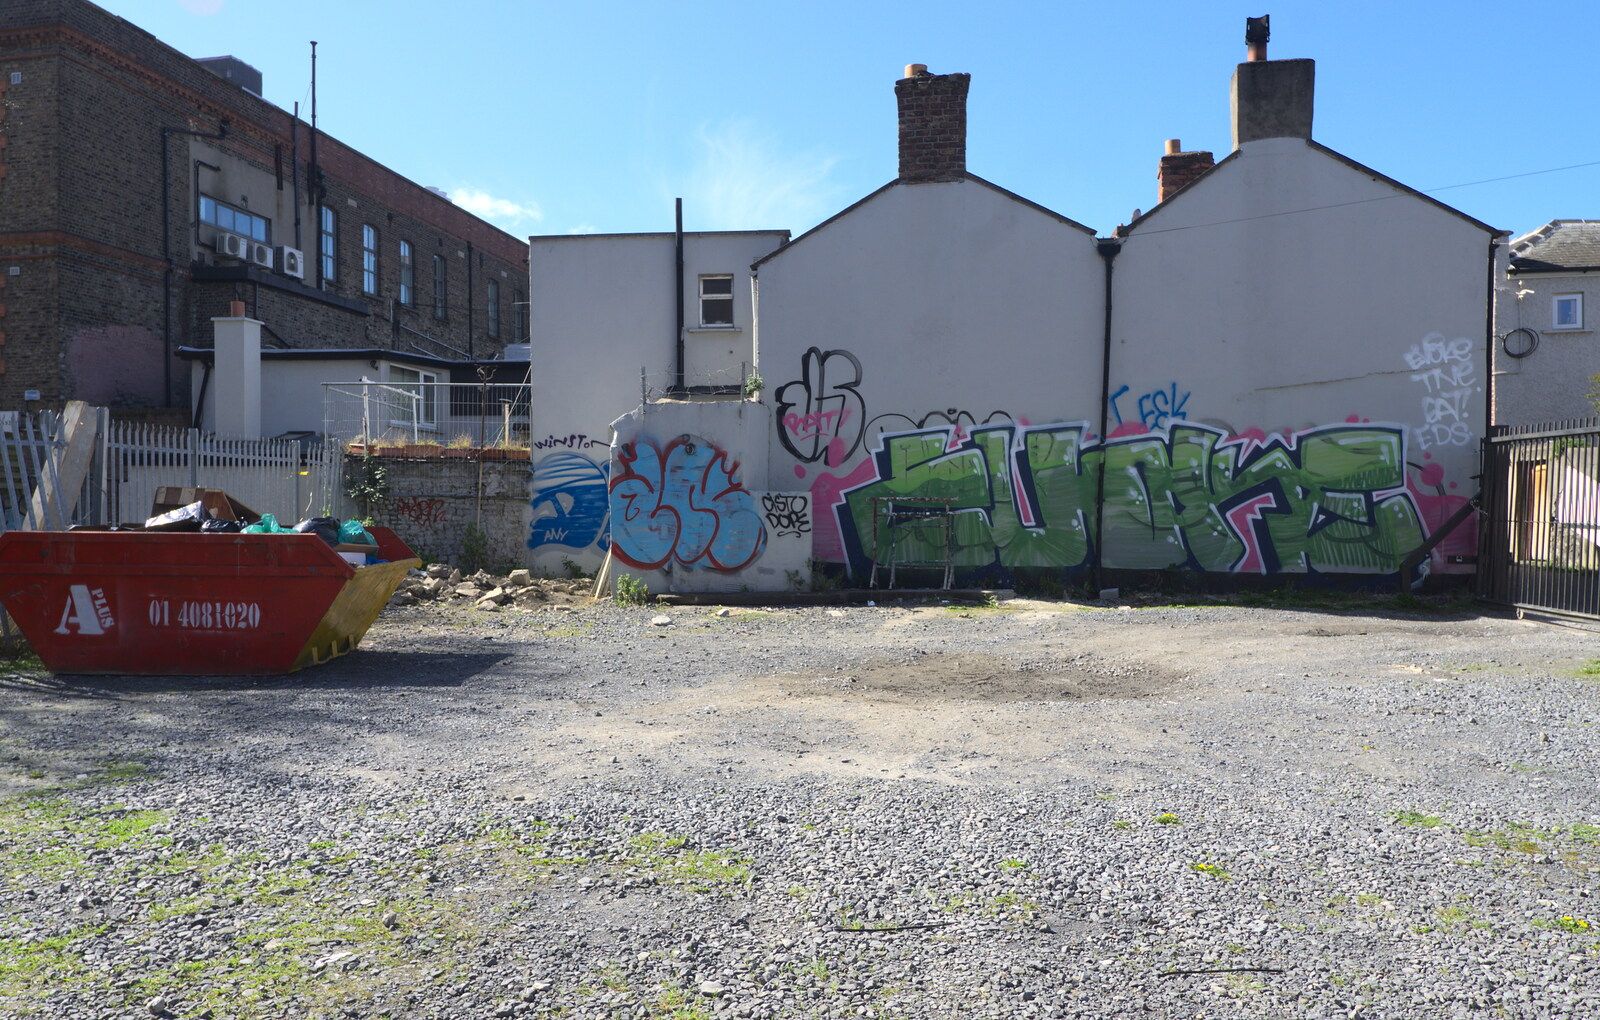 Graffiti and wasteland next to the registry office from James and Haryanna's Wedding, Grand Canal Dock, Dublin - 15th April 2015